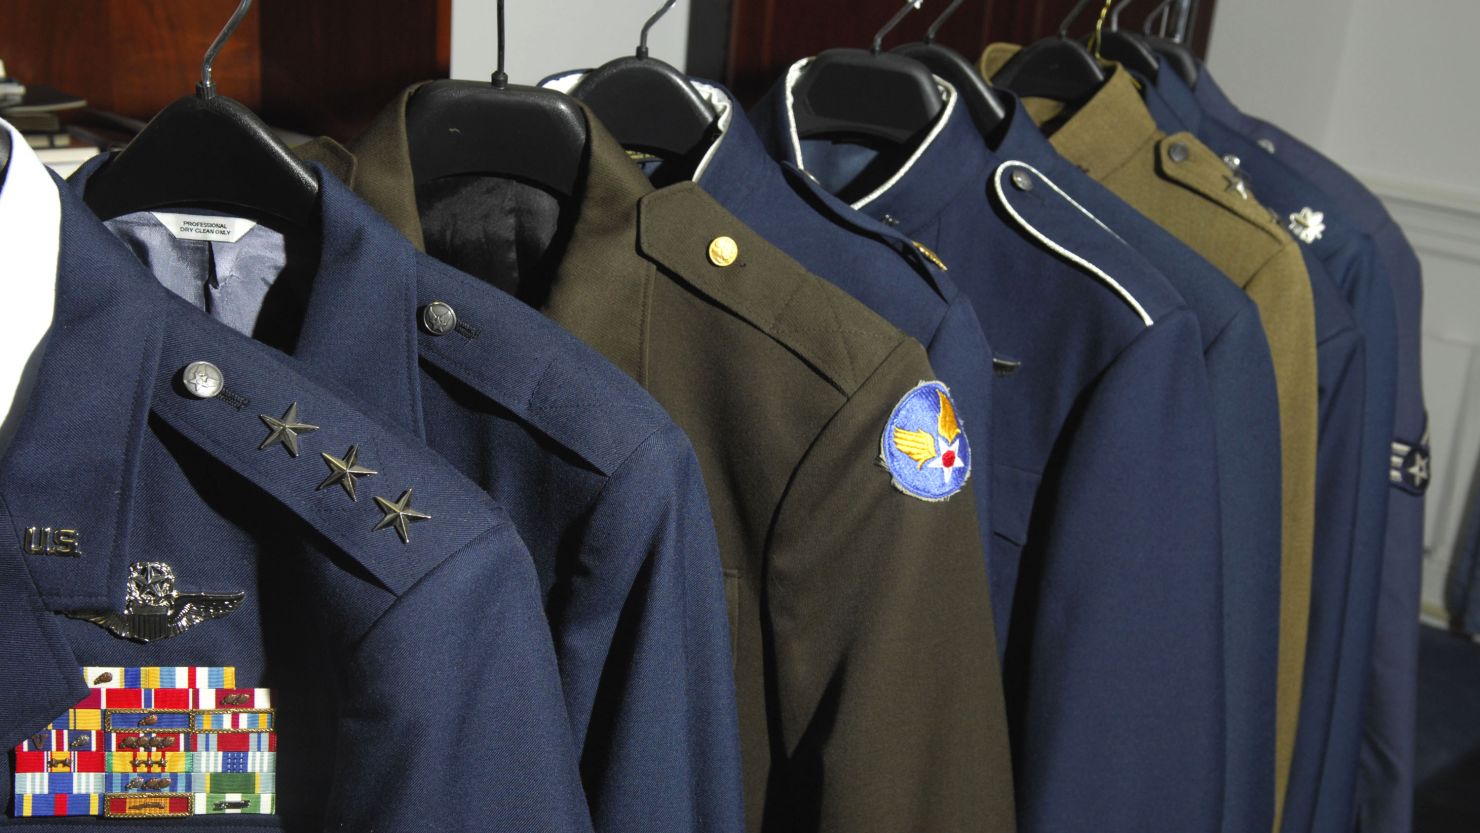 The Air Force will look through 7 decades worth of uniforms for inspiration. 